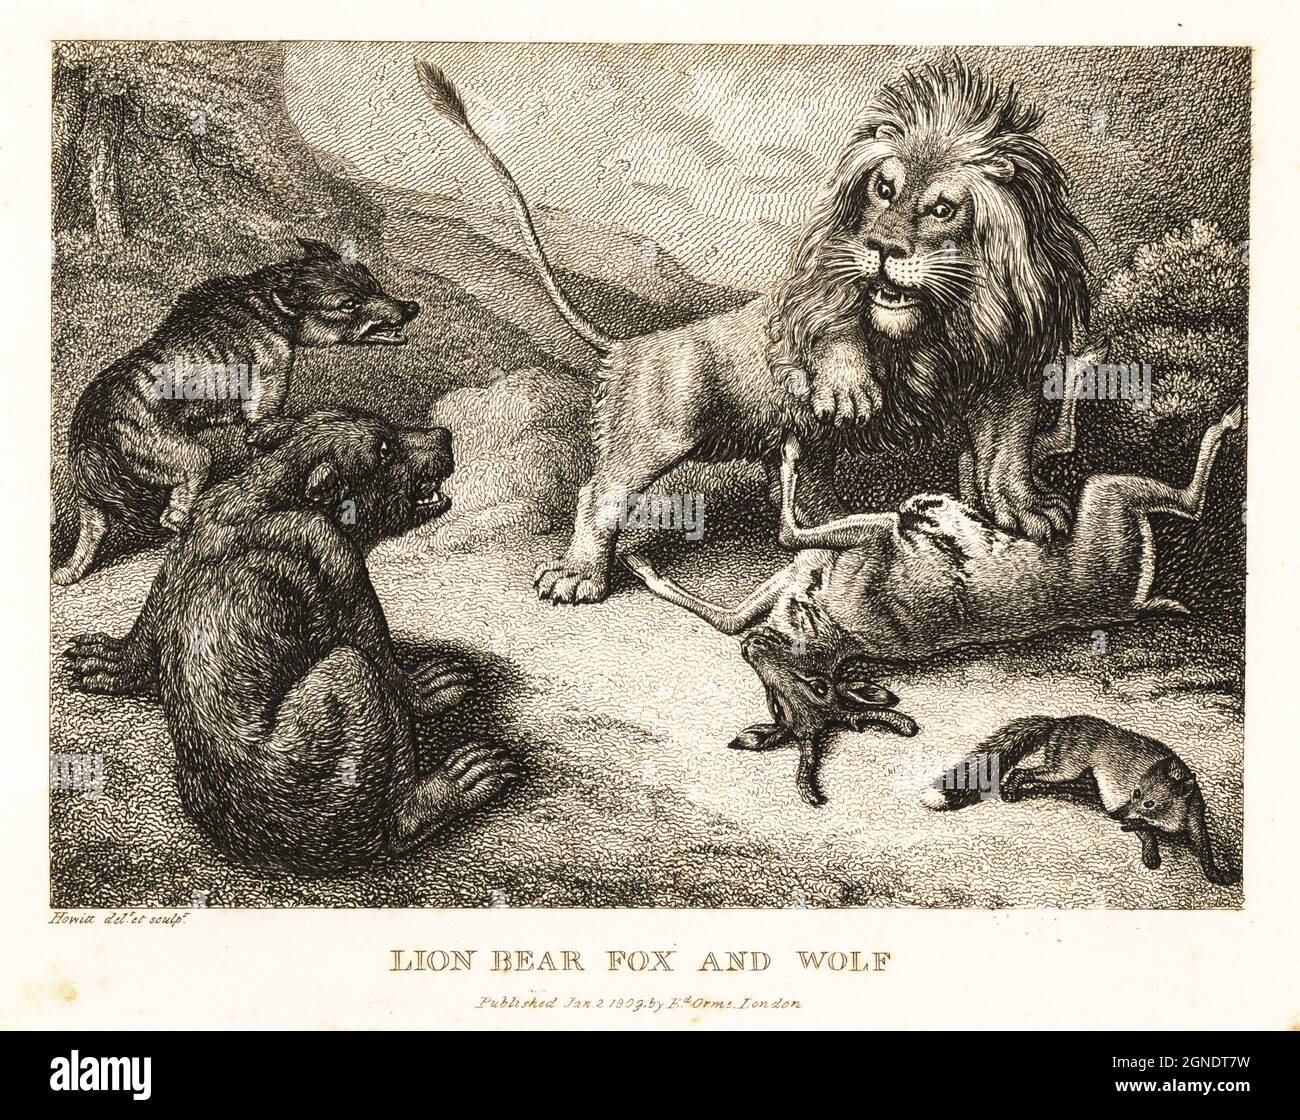 A lion stands with its left foreleg on the belly of a deer, watched by a snarling bear, wolf and fox. Lion, bear, fox and wolf. Illustration of a fable by Greek author Aesop. Copperplate etching drawn and engraved from life by Samuel Howitt from his own A New Work of Animals, Principally Designed from the Fables of Aesop, Gay and Phaedrus, Edward Orme, London, 1811. Stock Photo